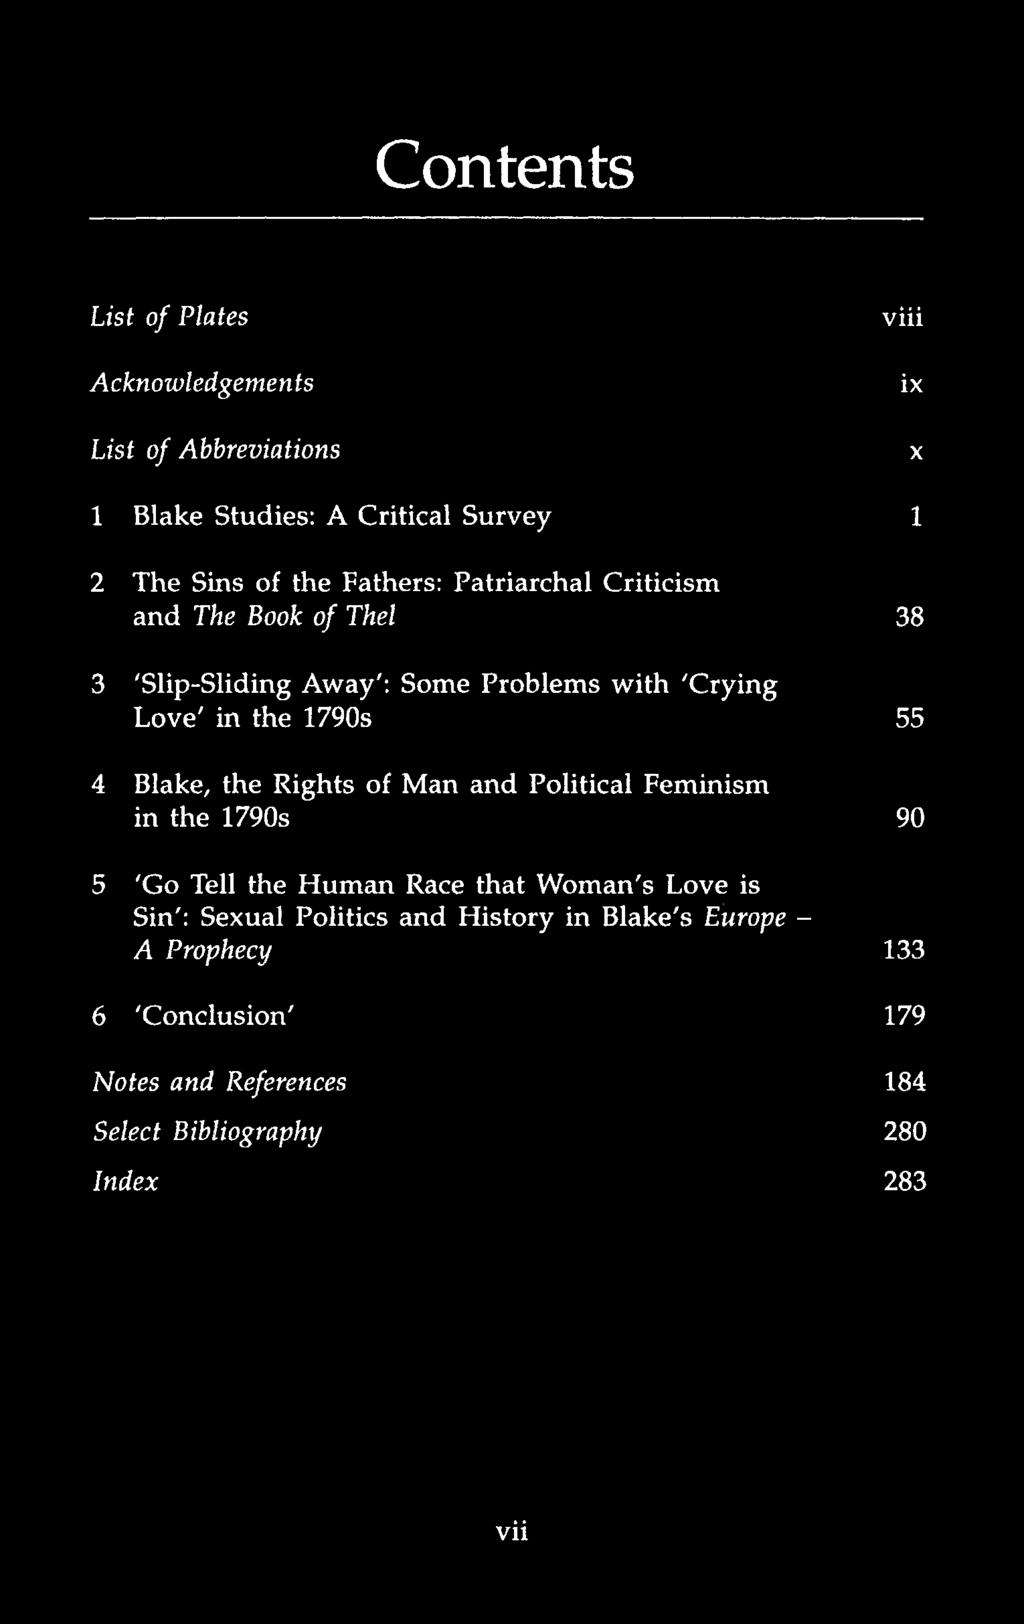 Contents List of Plates Acknowledgements List of Abbreviations viii ix x 1 Blake Studies: A Critical Survey 1 2 The Sins of the Fathers: Patriarchal Criticism and The Book of Thel 38 3 'Slip-Sliding